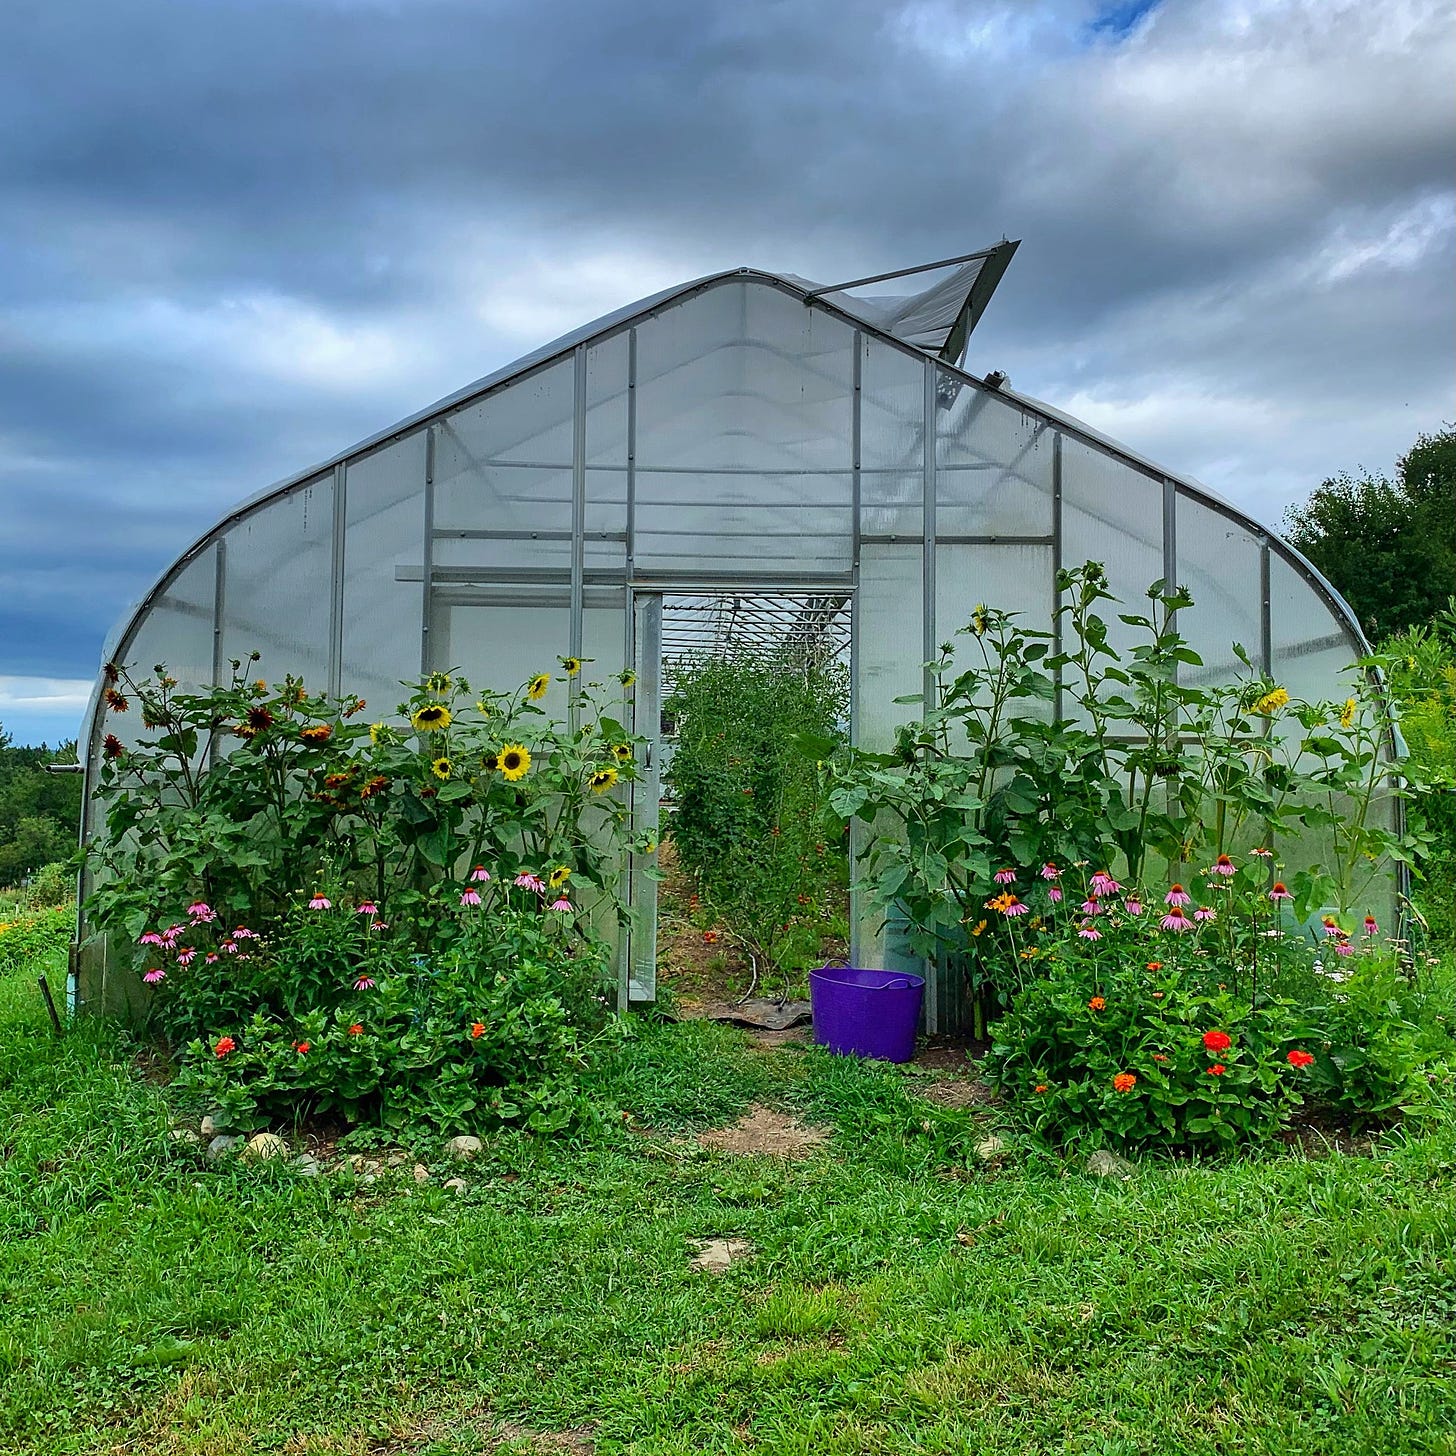 Sunflowers, echinacea, and zinnias bloom in front of a greenhouse with an open door